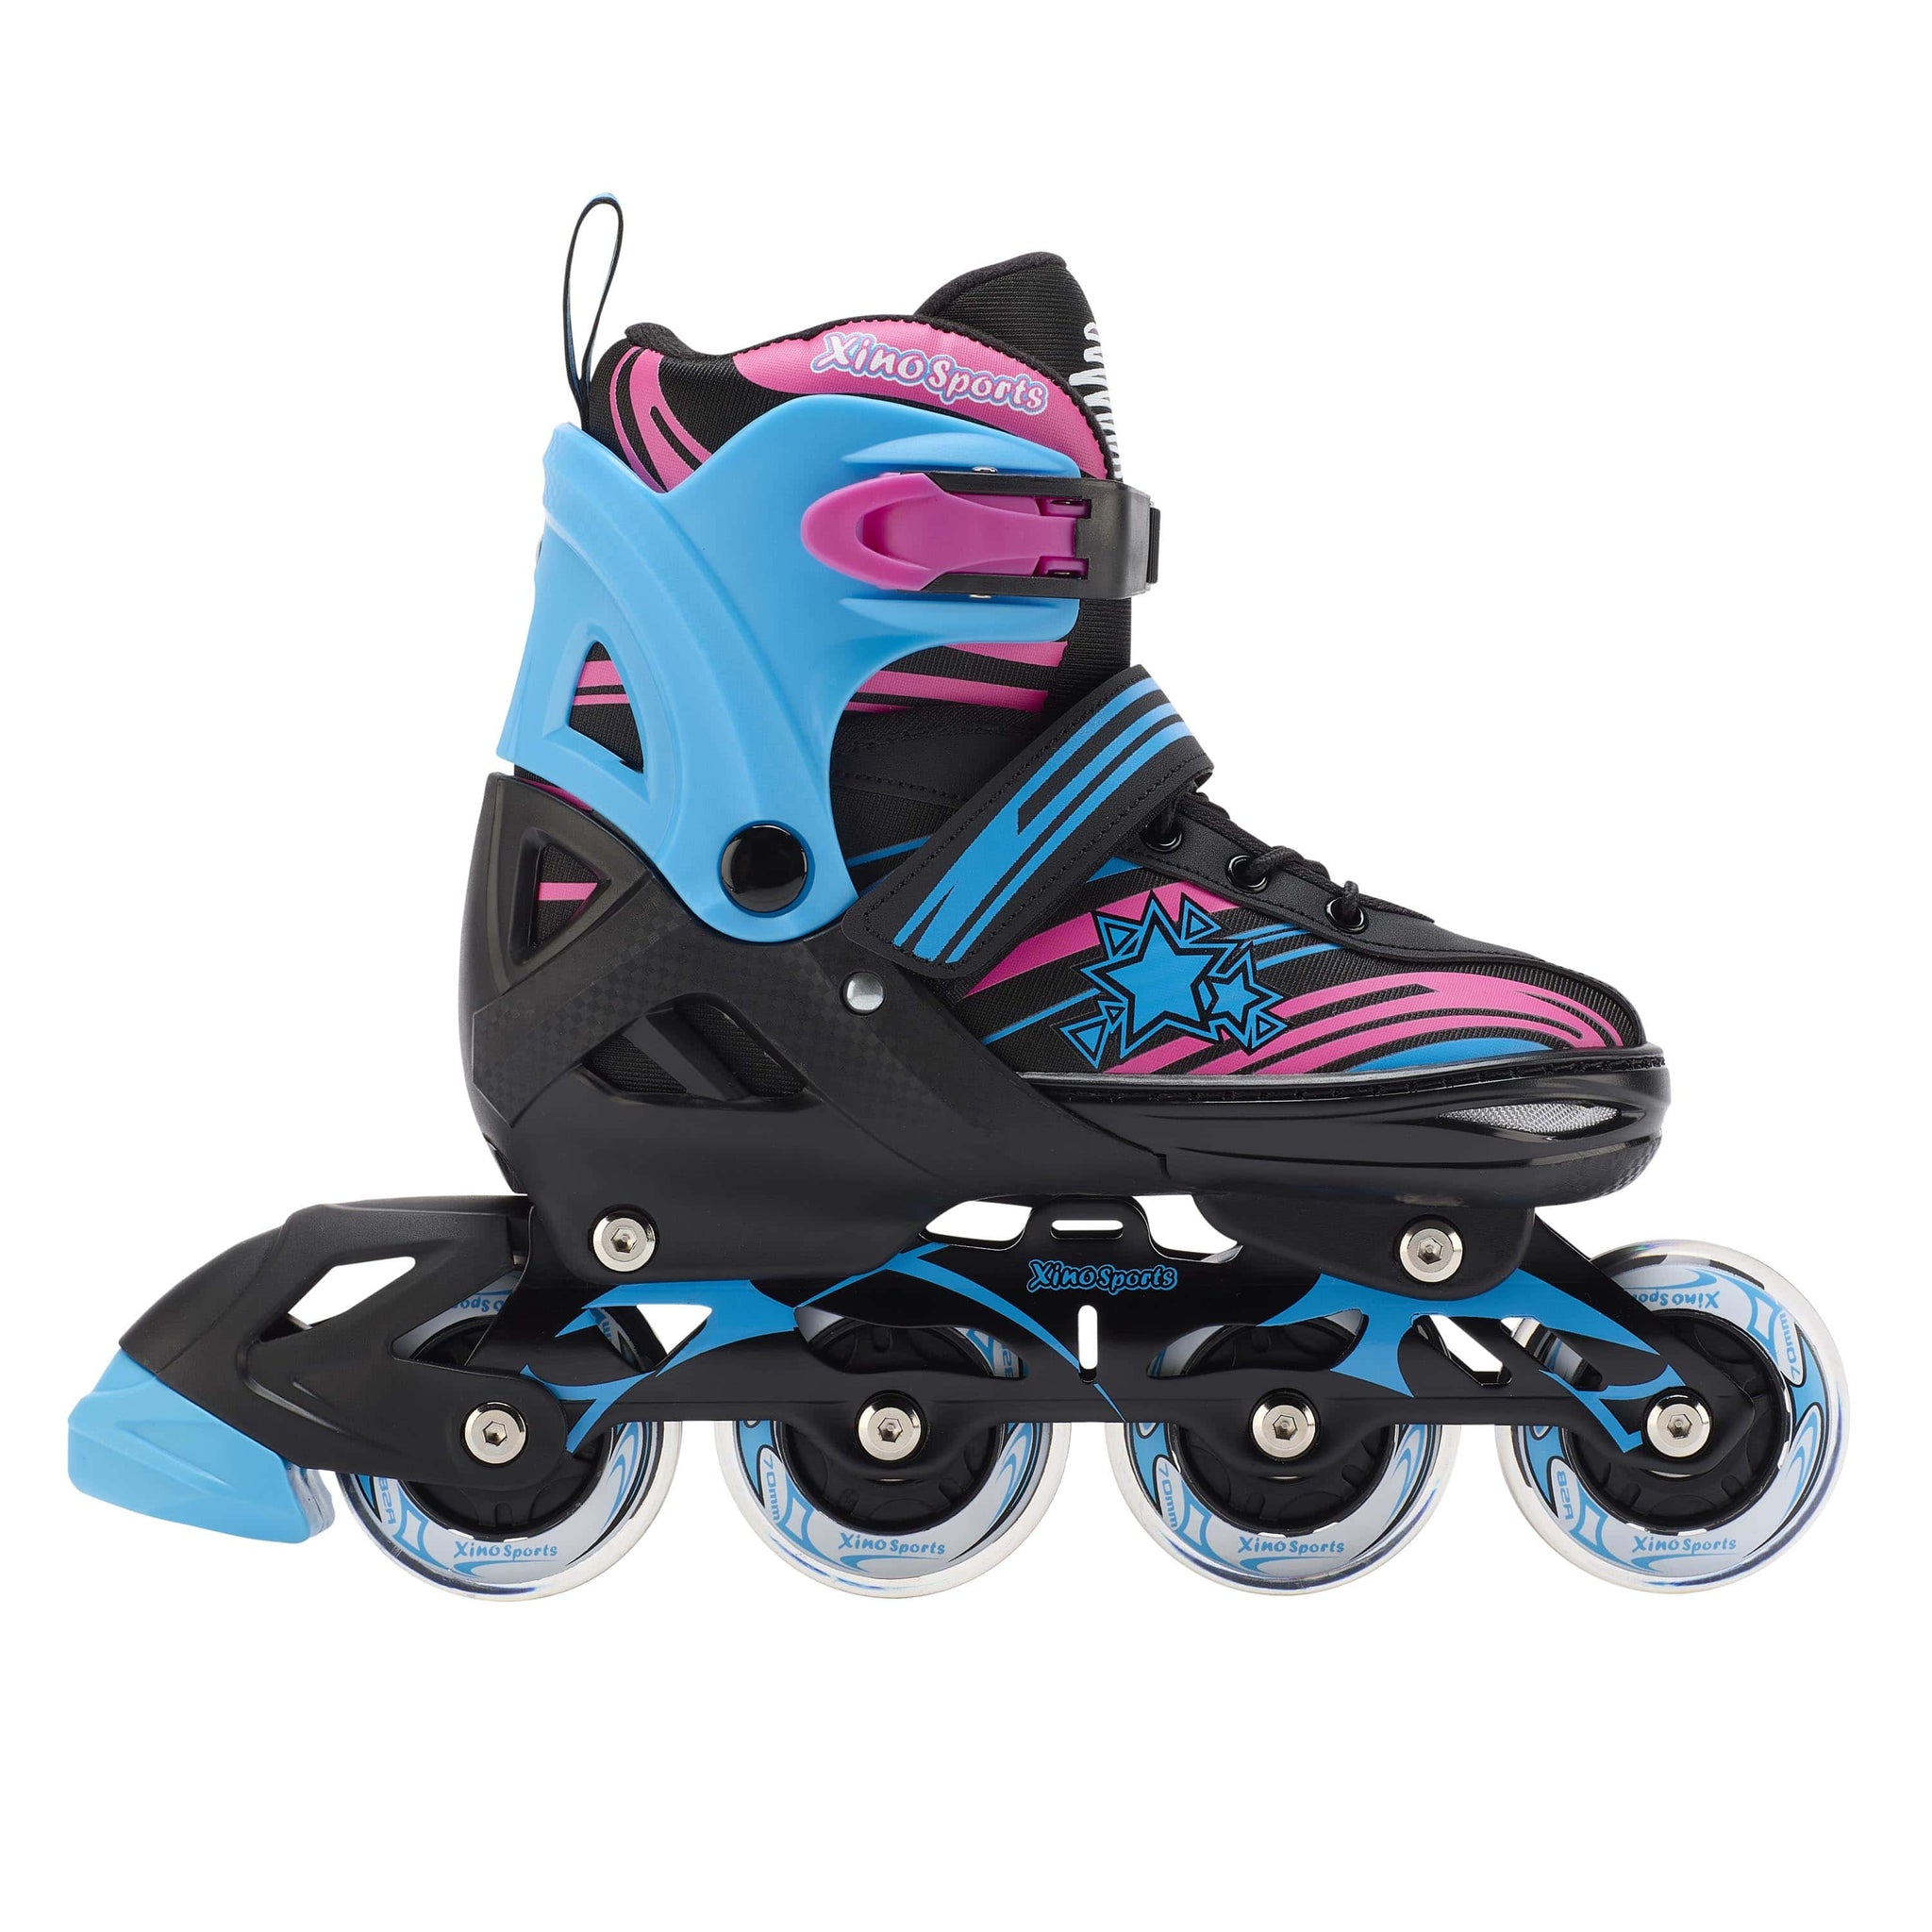 Adjustable Inline Skates with light-up wheels - Xino Sports